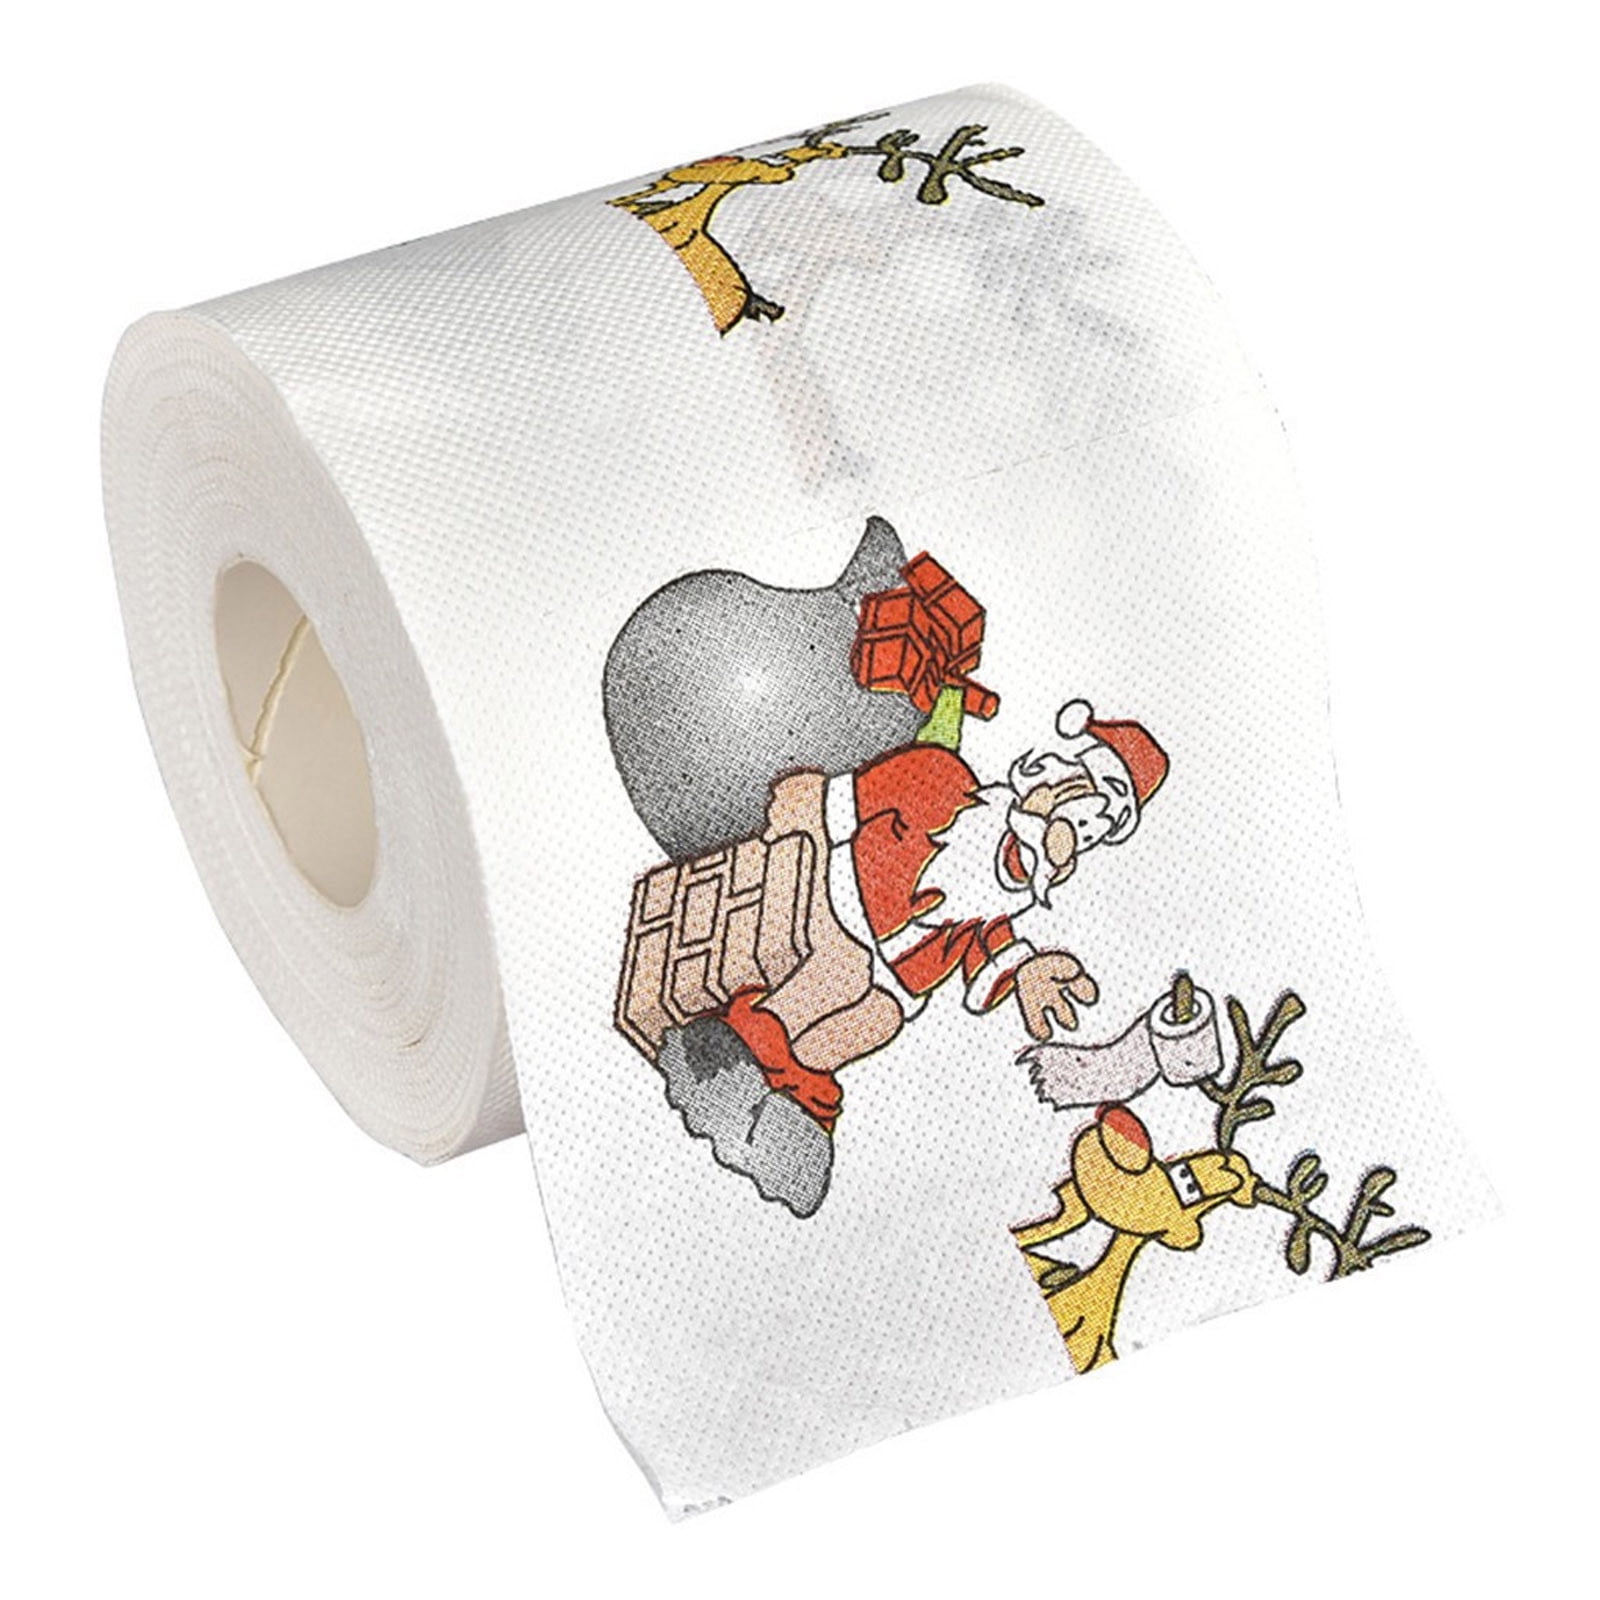 Christmas Pattern Series Roll Paper Prints Funny Toilet Paper Christmas Decor 